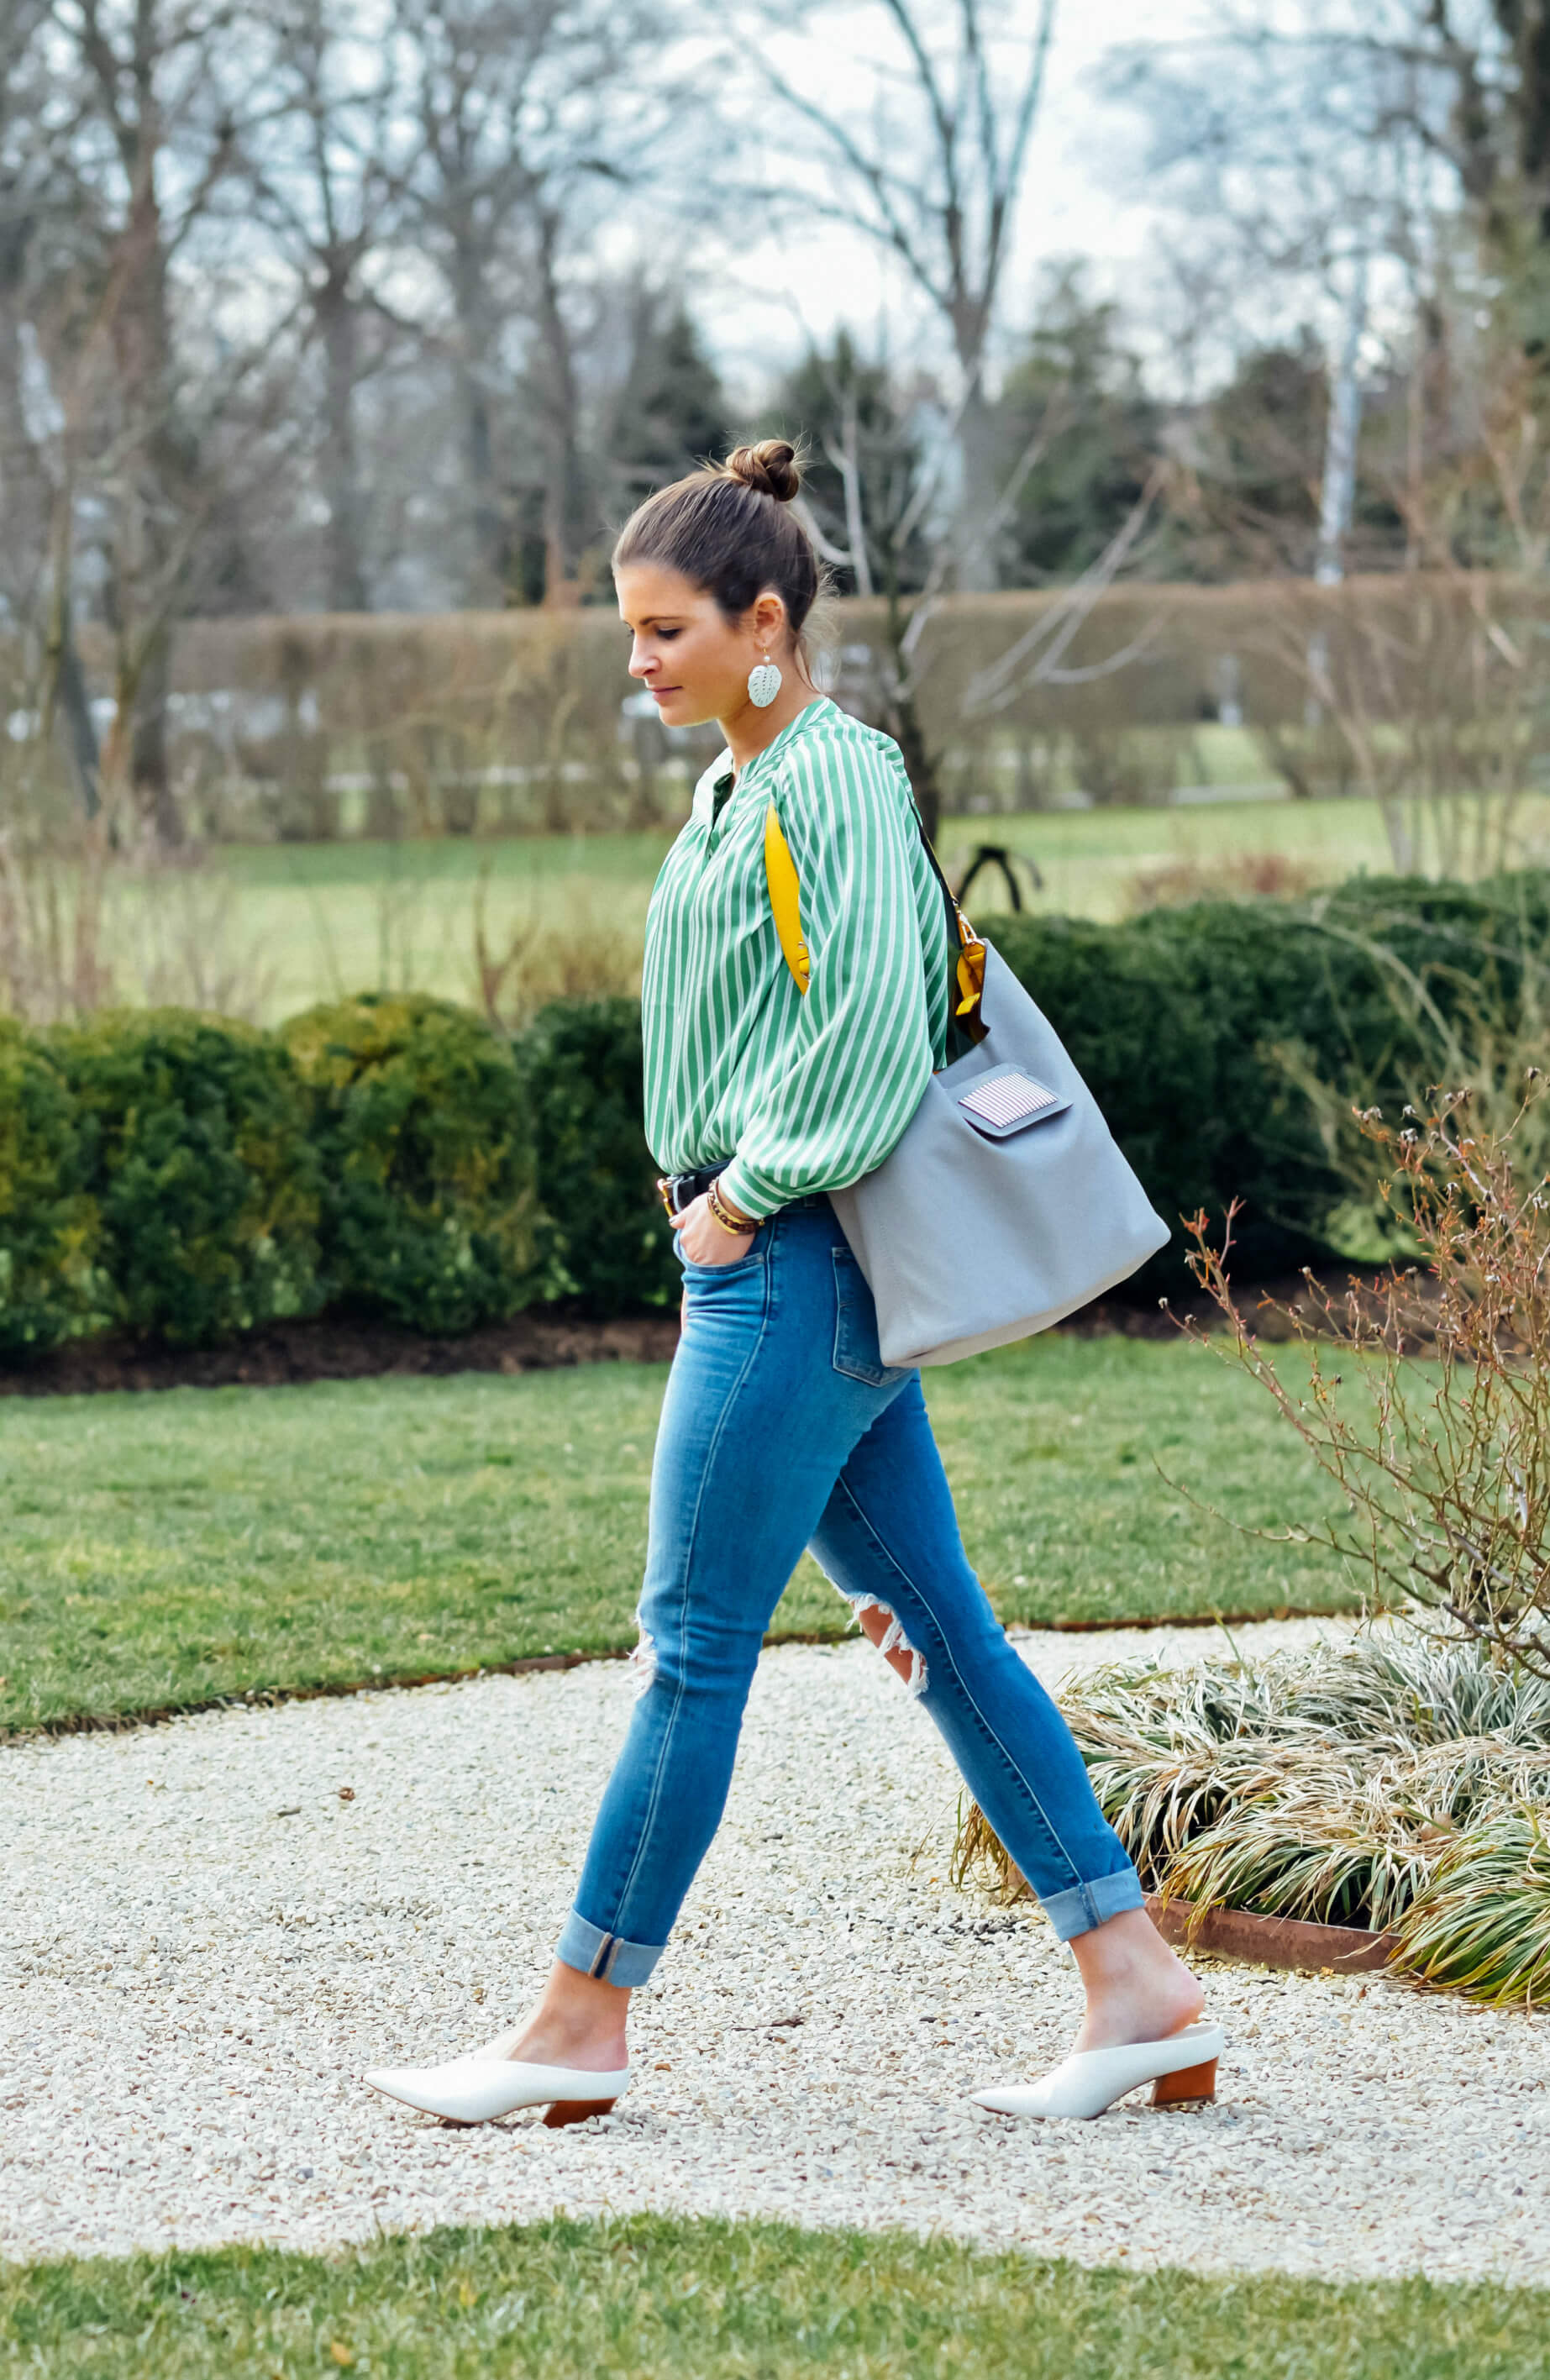 Green Striped Blouse, Henri Bendel Influencer Hobo Bag, White Mules, Spring Outfit, Tilden of To Be Bright